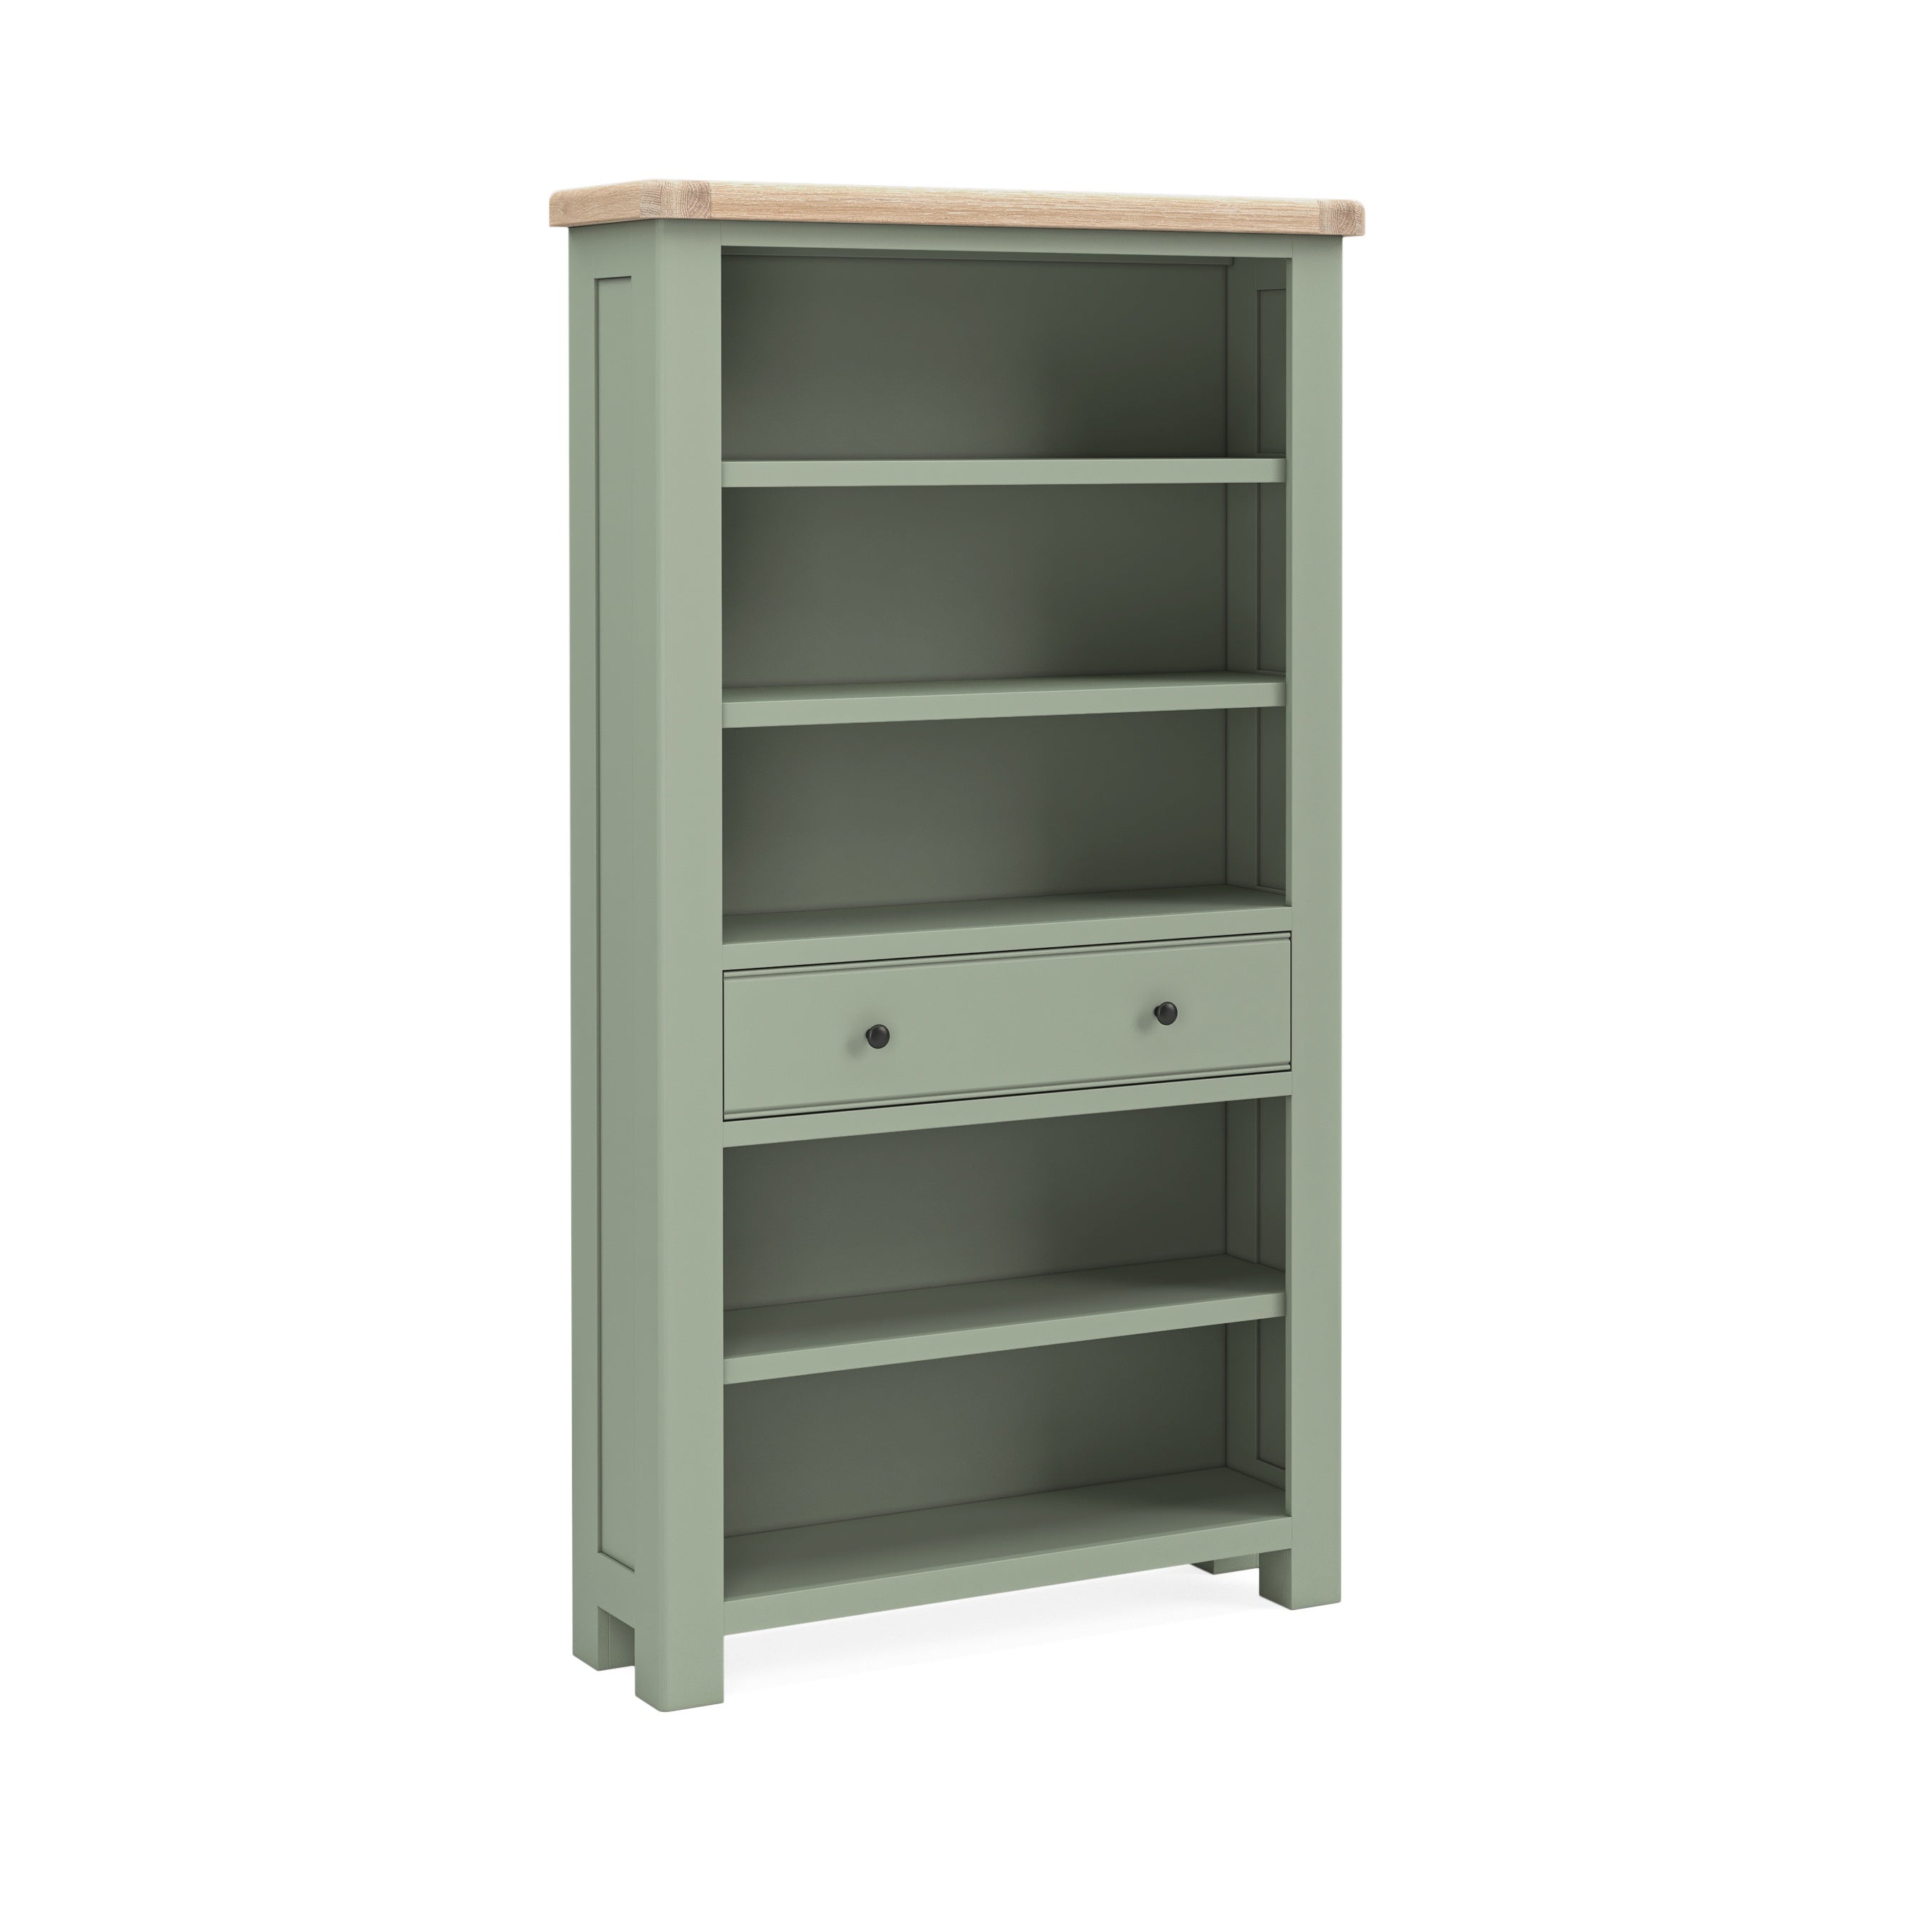 Provence Oak Sage Large Bookcase with Drawer.